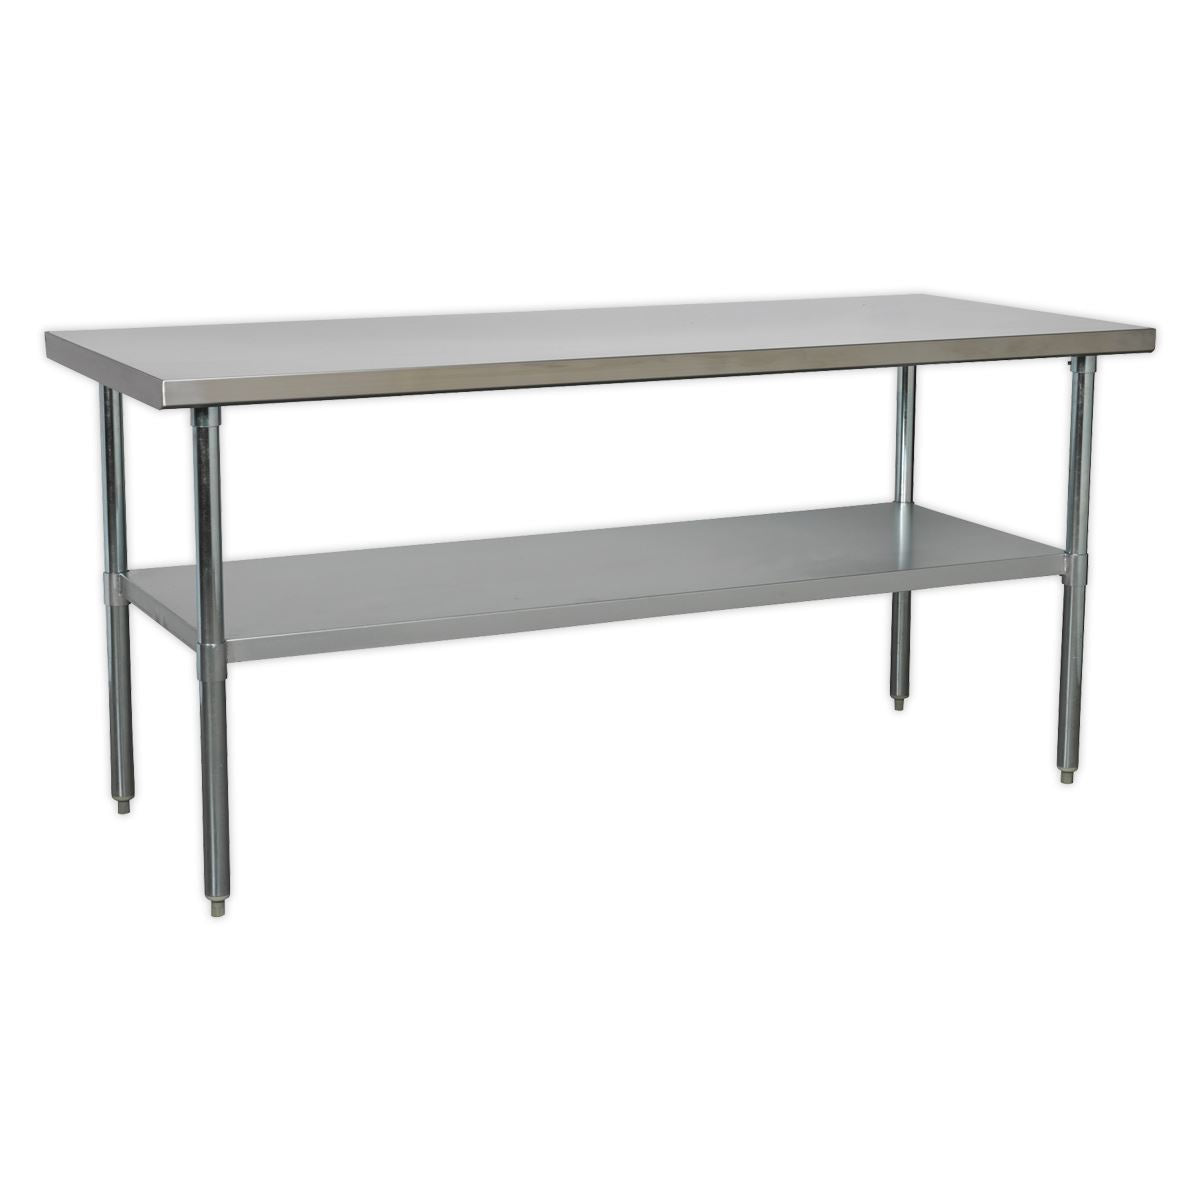 Sealey Stainless Steel Workbench 1.8m